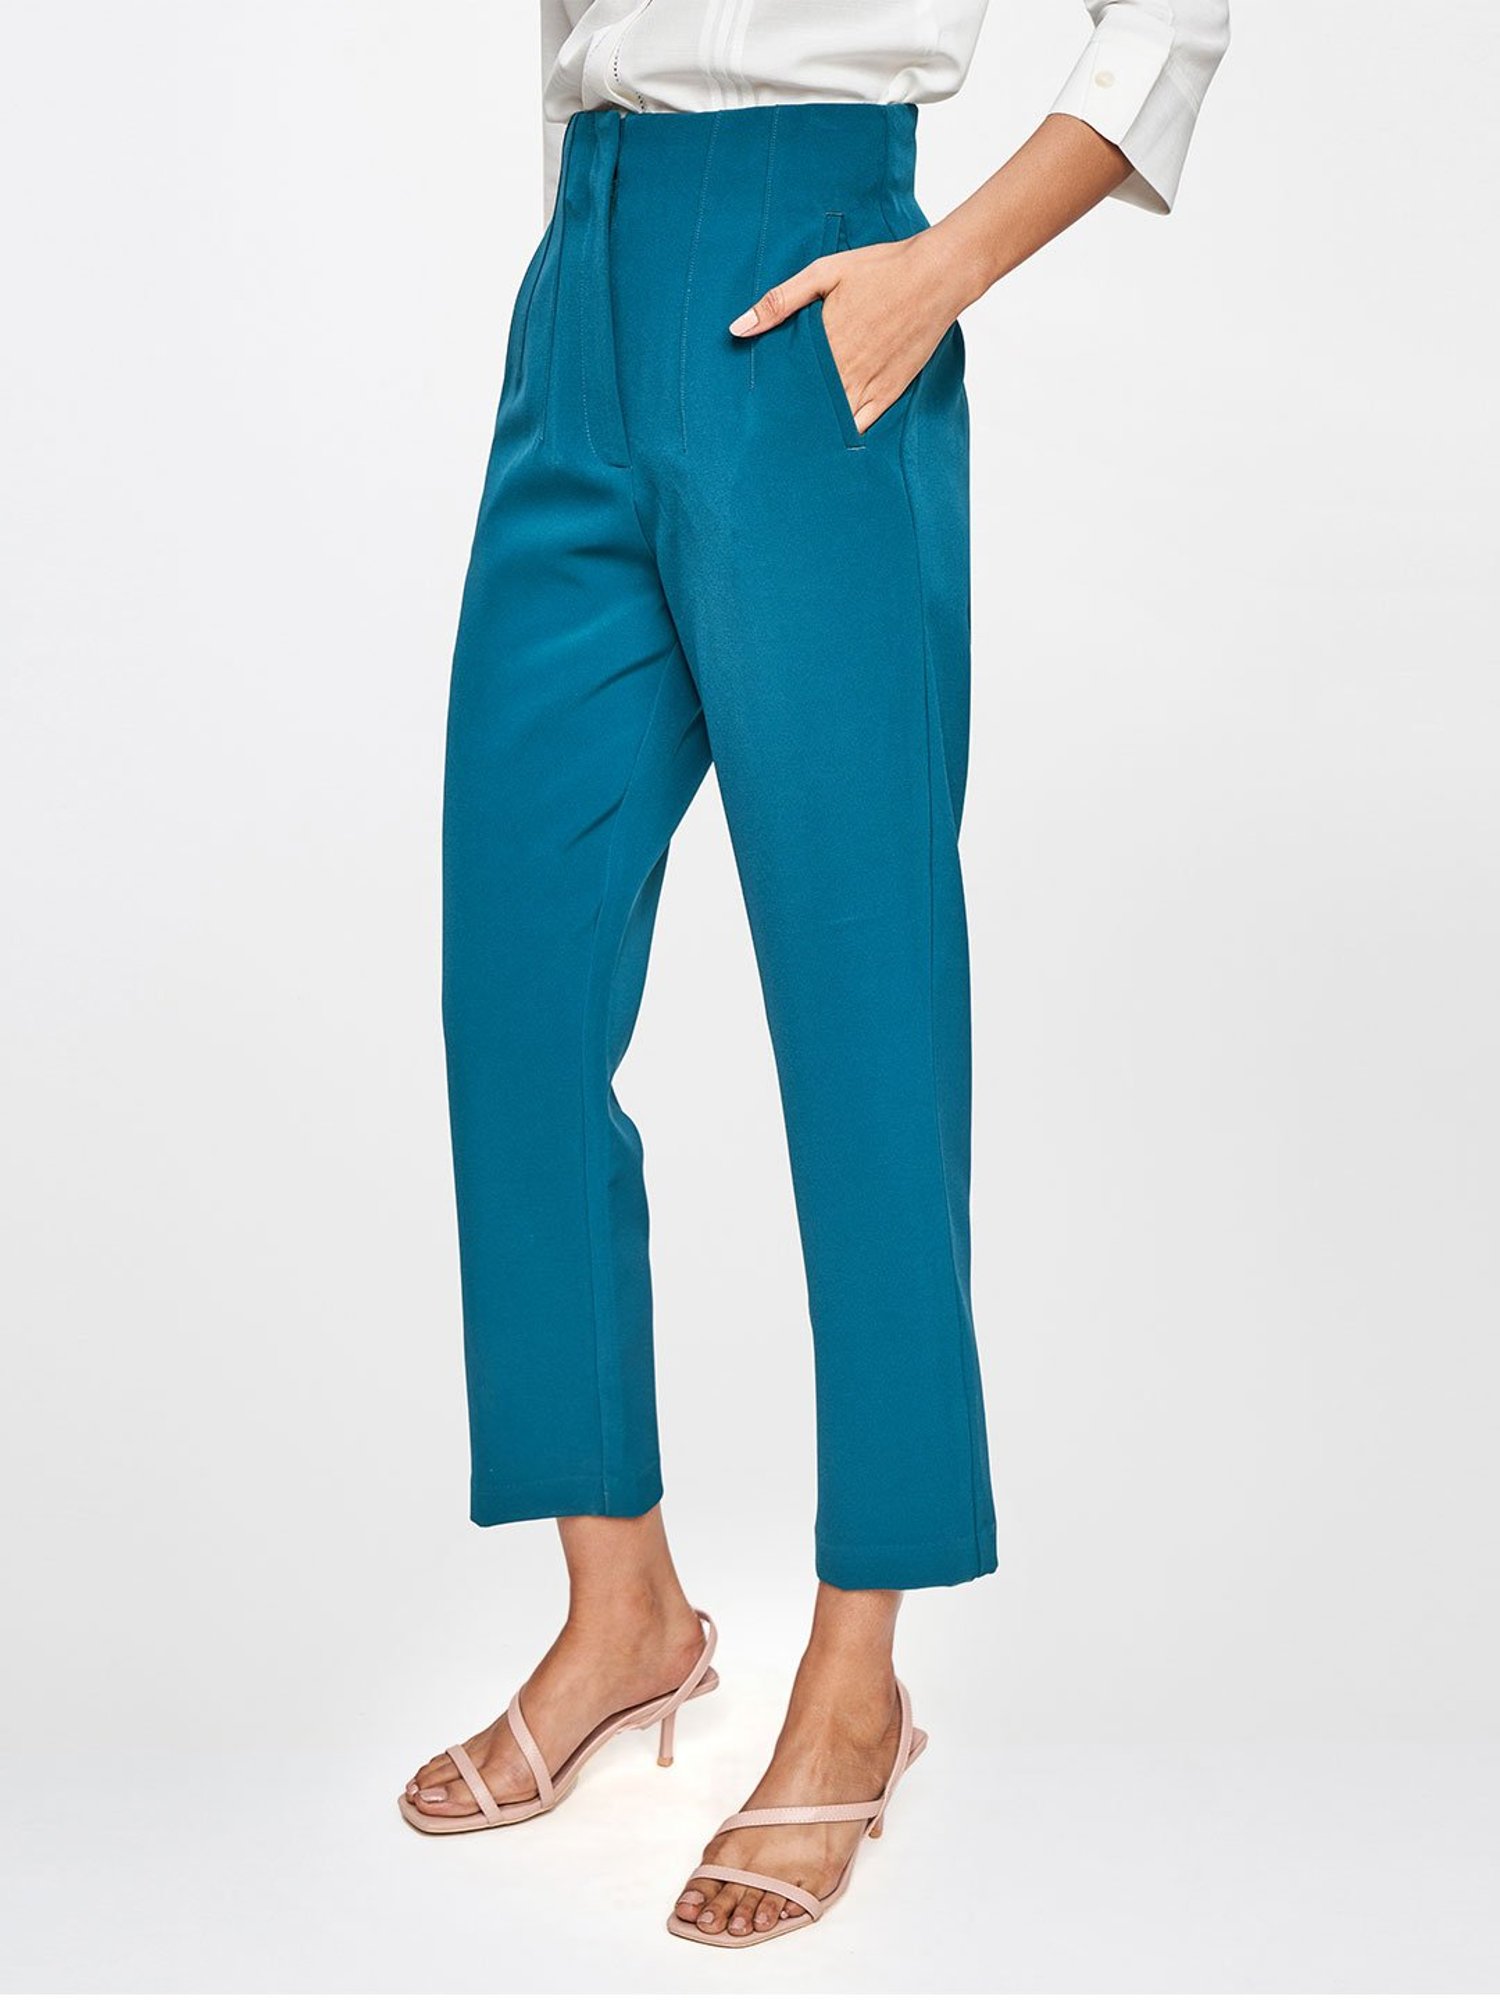 Teal cigarette pencil pants & trousers for women casual and office wear.